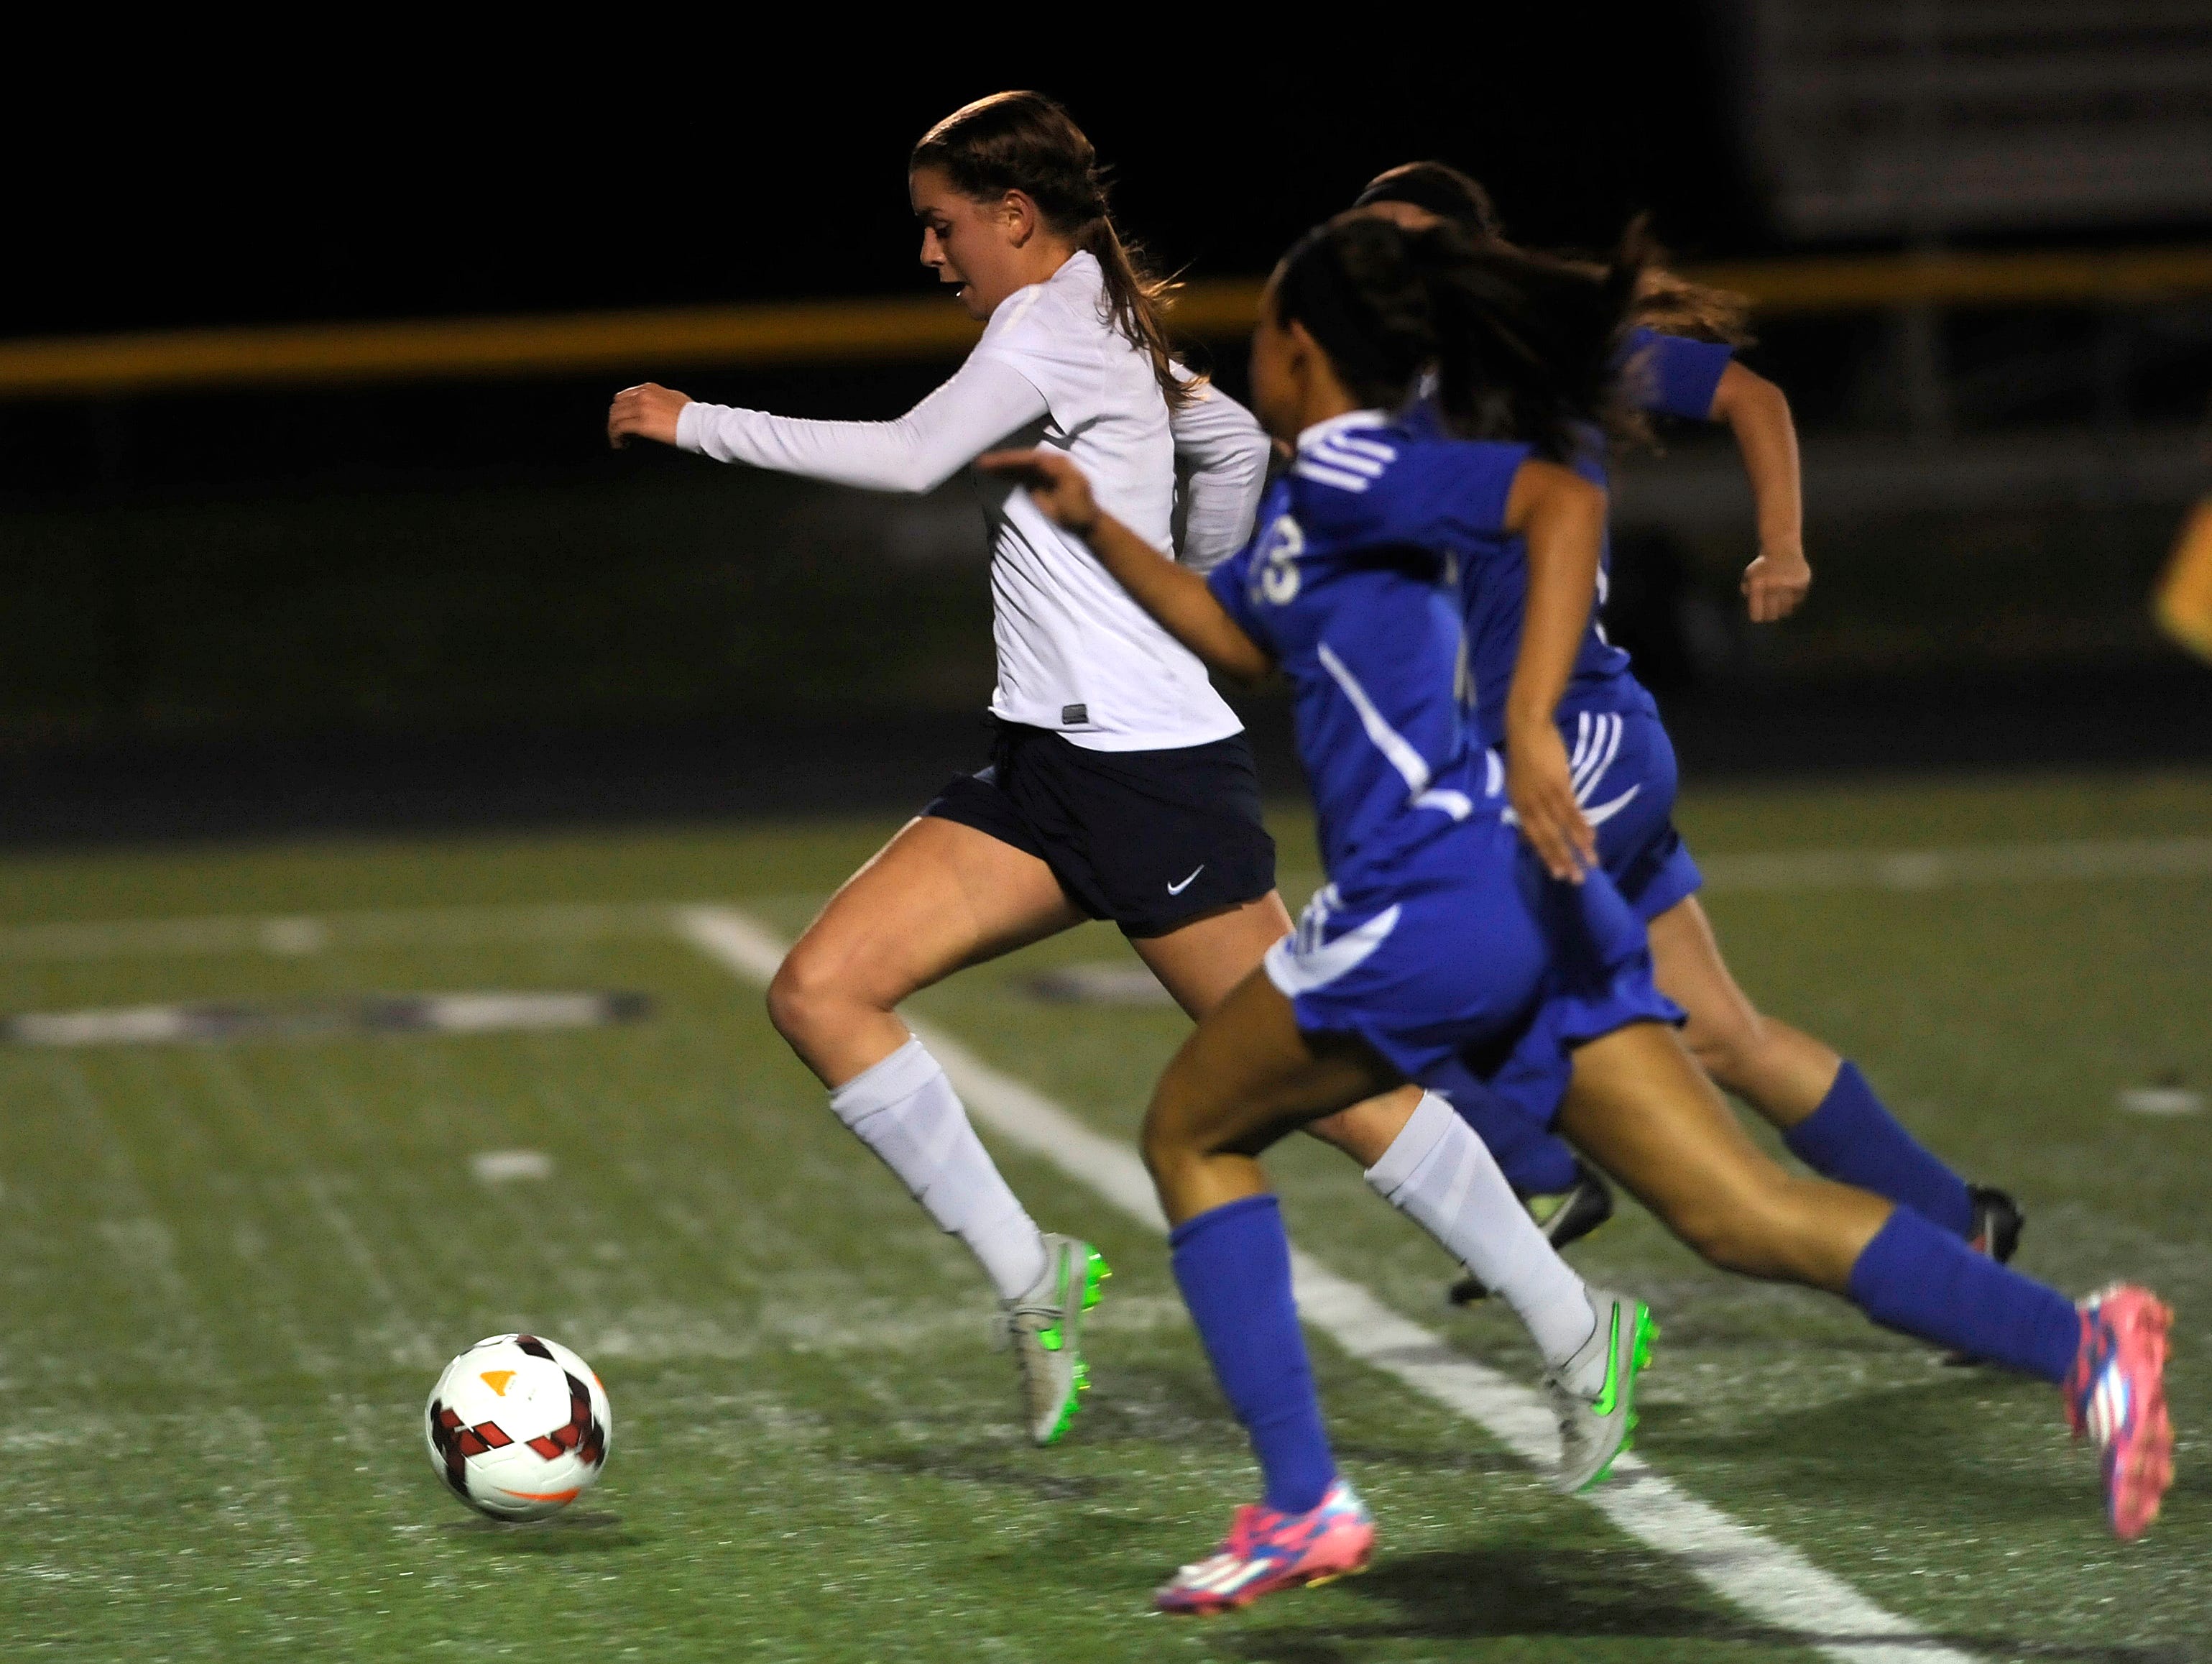 Granville's Rose Sawyers breaks away from Chillicothe defenders to score her third goal during Tuesday night's Division II regional semifinal game at Bloom-Carroll. The Blue Aces defeated Chillicothe 8-0.